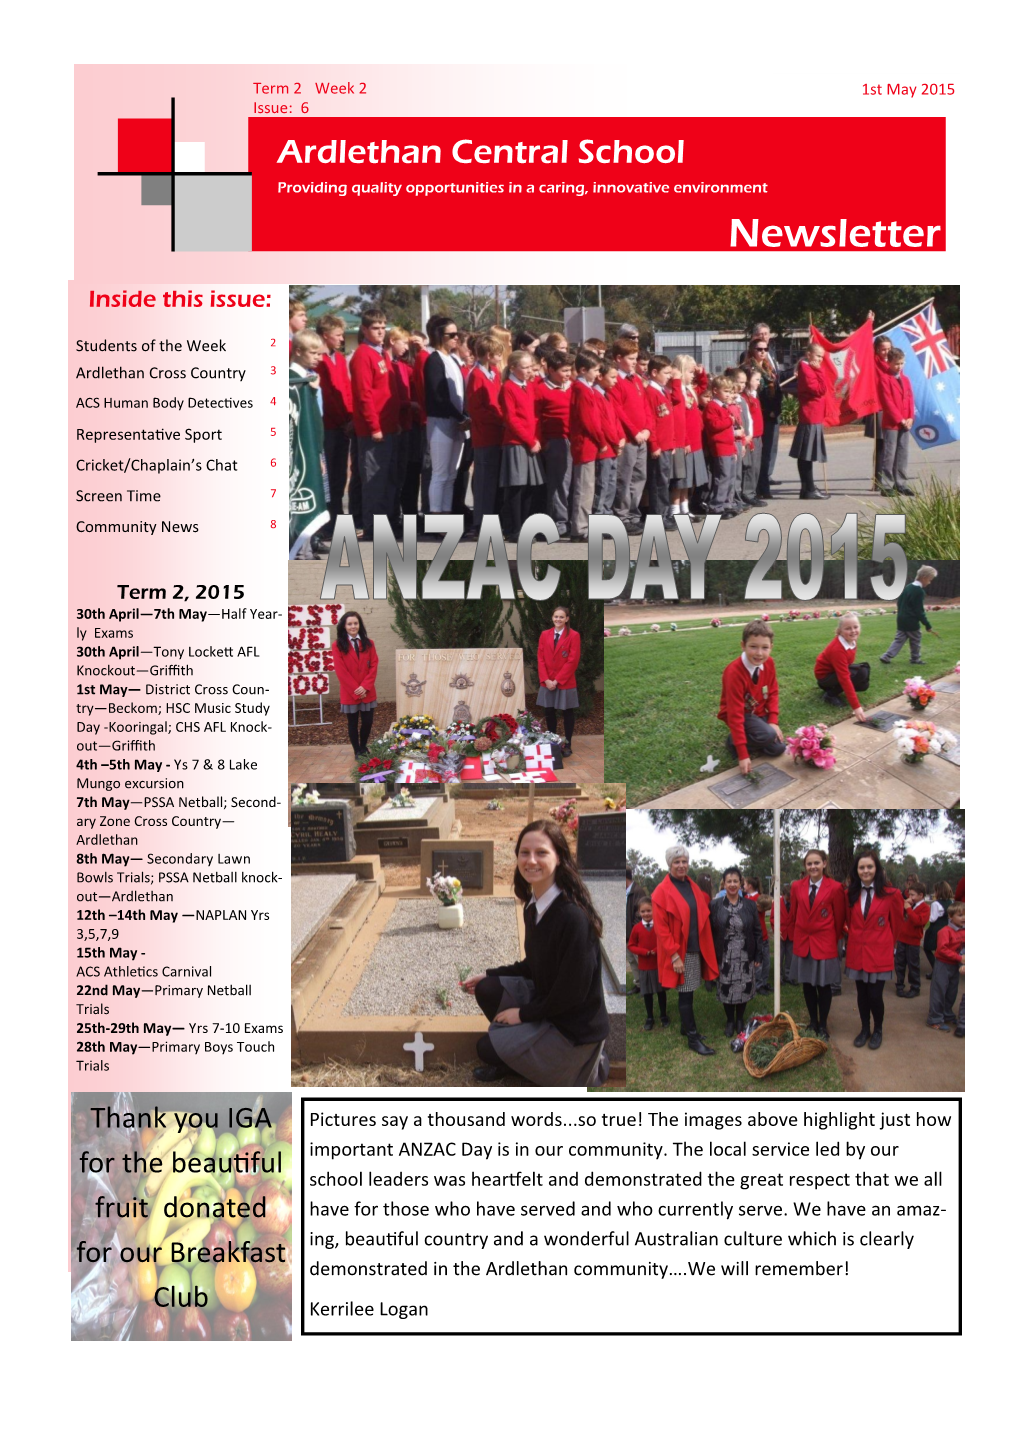 Term 2 Week 2 1St May 2015 Issue: 6 Ardlethan Central School Providing Quality Opportunities in a Caring, Innovative Environment Newsletter